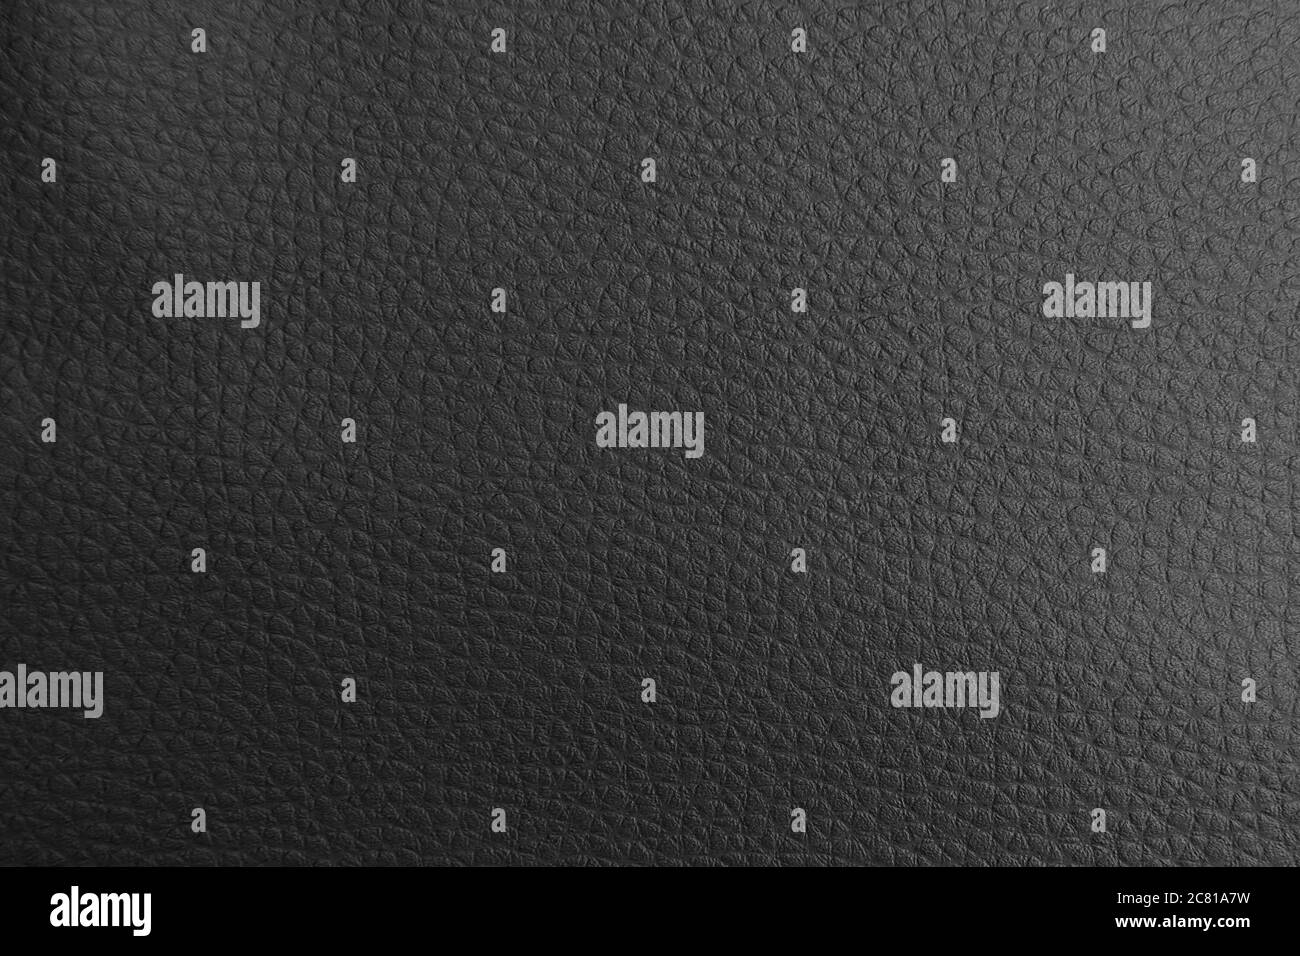 Abstract background of smooth black leather fabric. Stock Photo